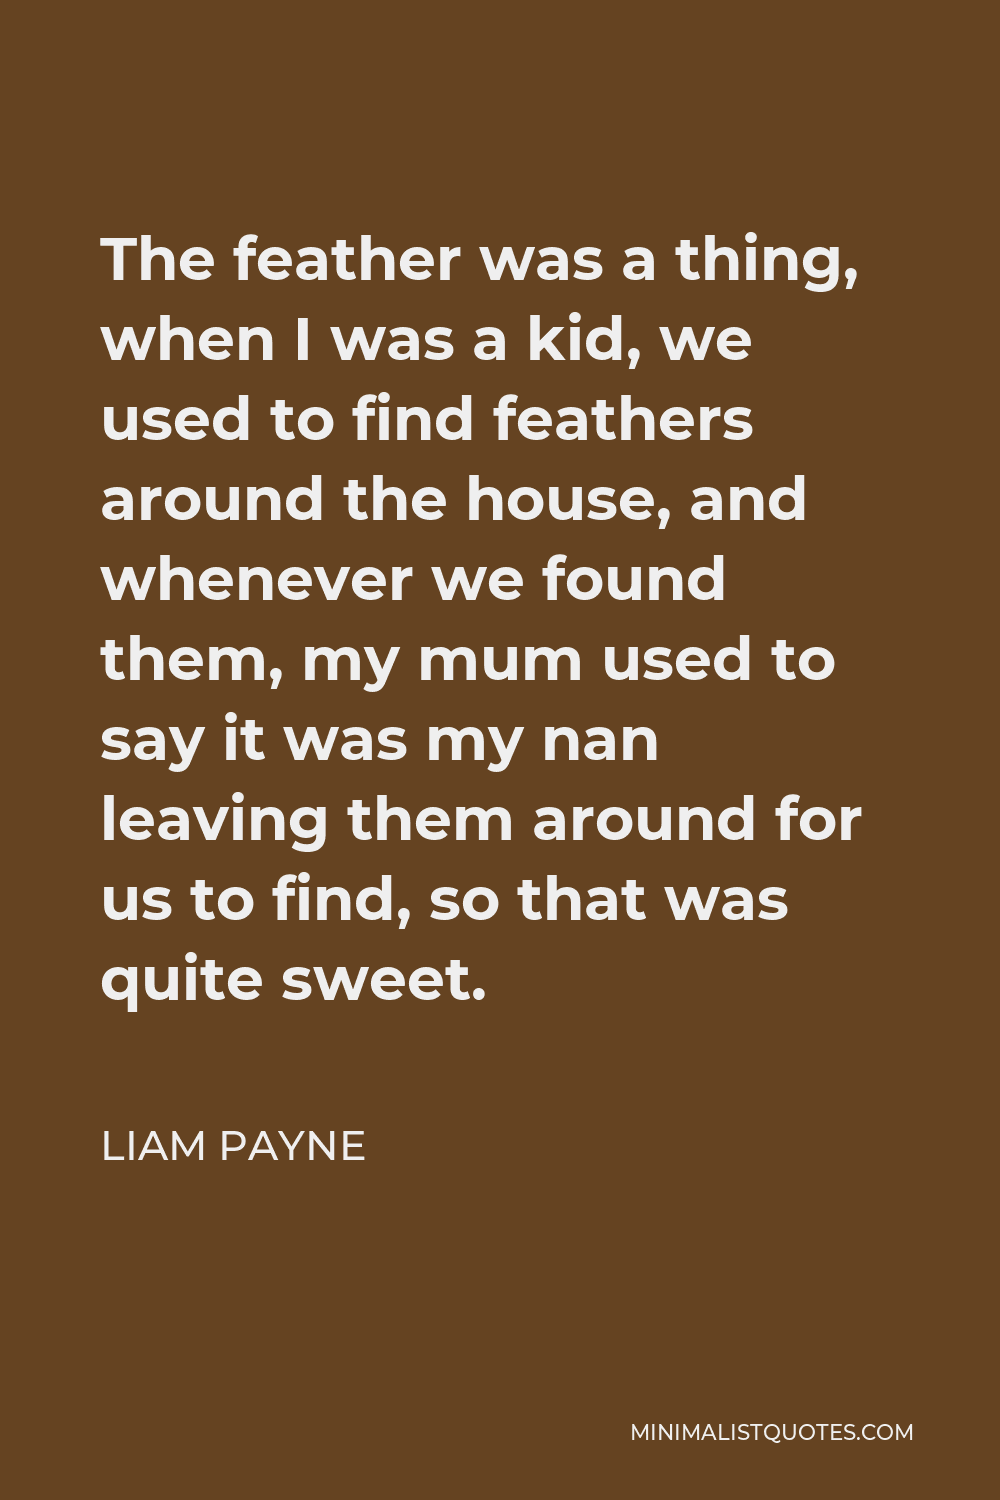 Liam Payne Quote - The feather was a thing, when I was a kid, we used to find feathers around the house, and whenever we found them, my mum used to say it was my nan leaving them around for us to find, so that was quite sweet.